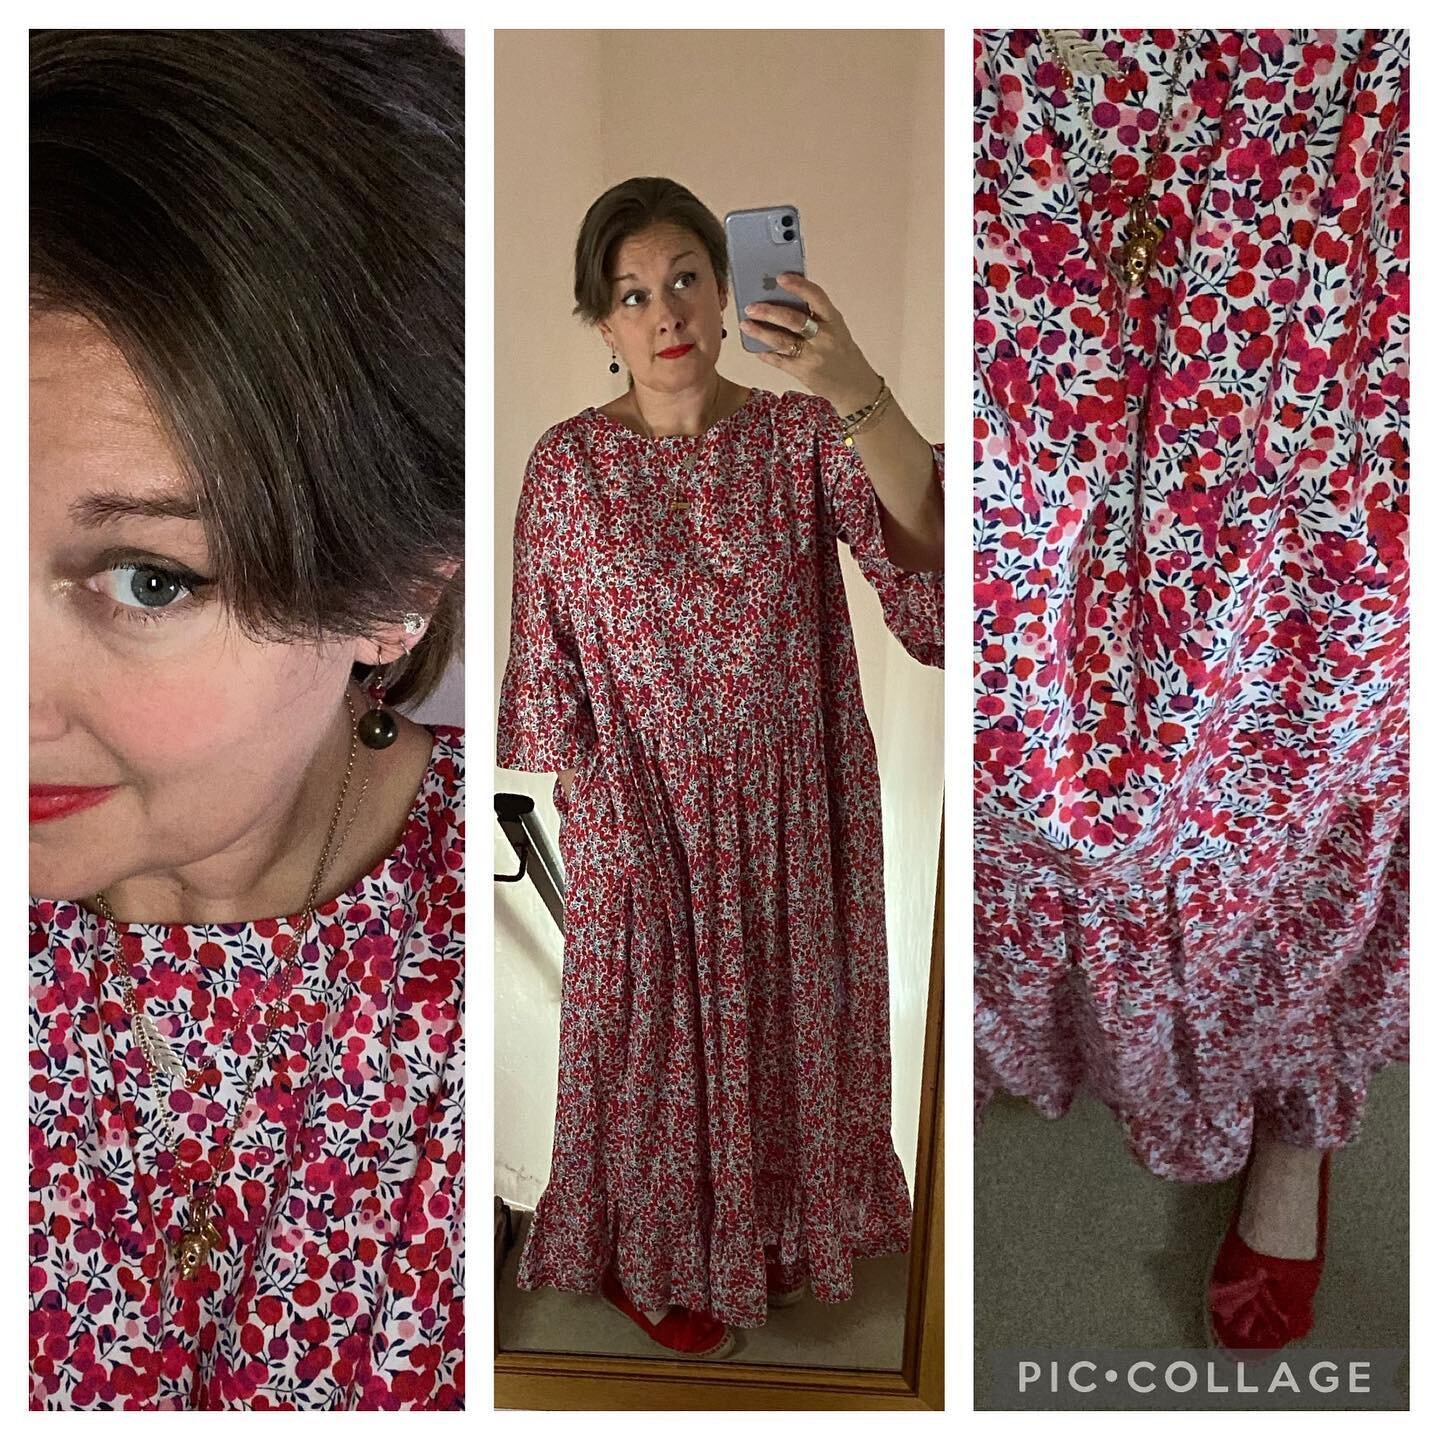 Fashion - date night outfit.
.
After a lovely day out and about we left the children in the capable hands of my Mum @gillianreynolds87 and headed out for a rare evening out sans enfants.
.
This dress from the brilliant @stalf.studio it&rsquo;s is a g